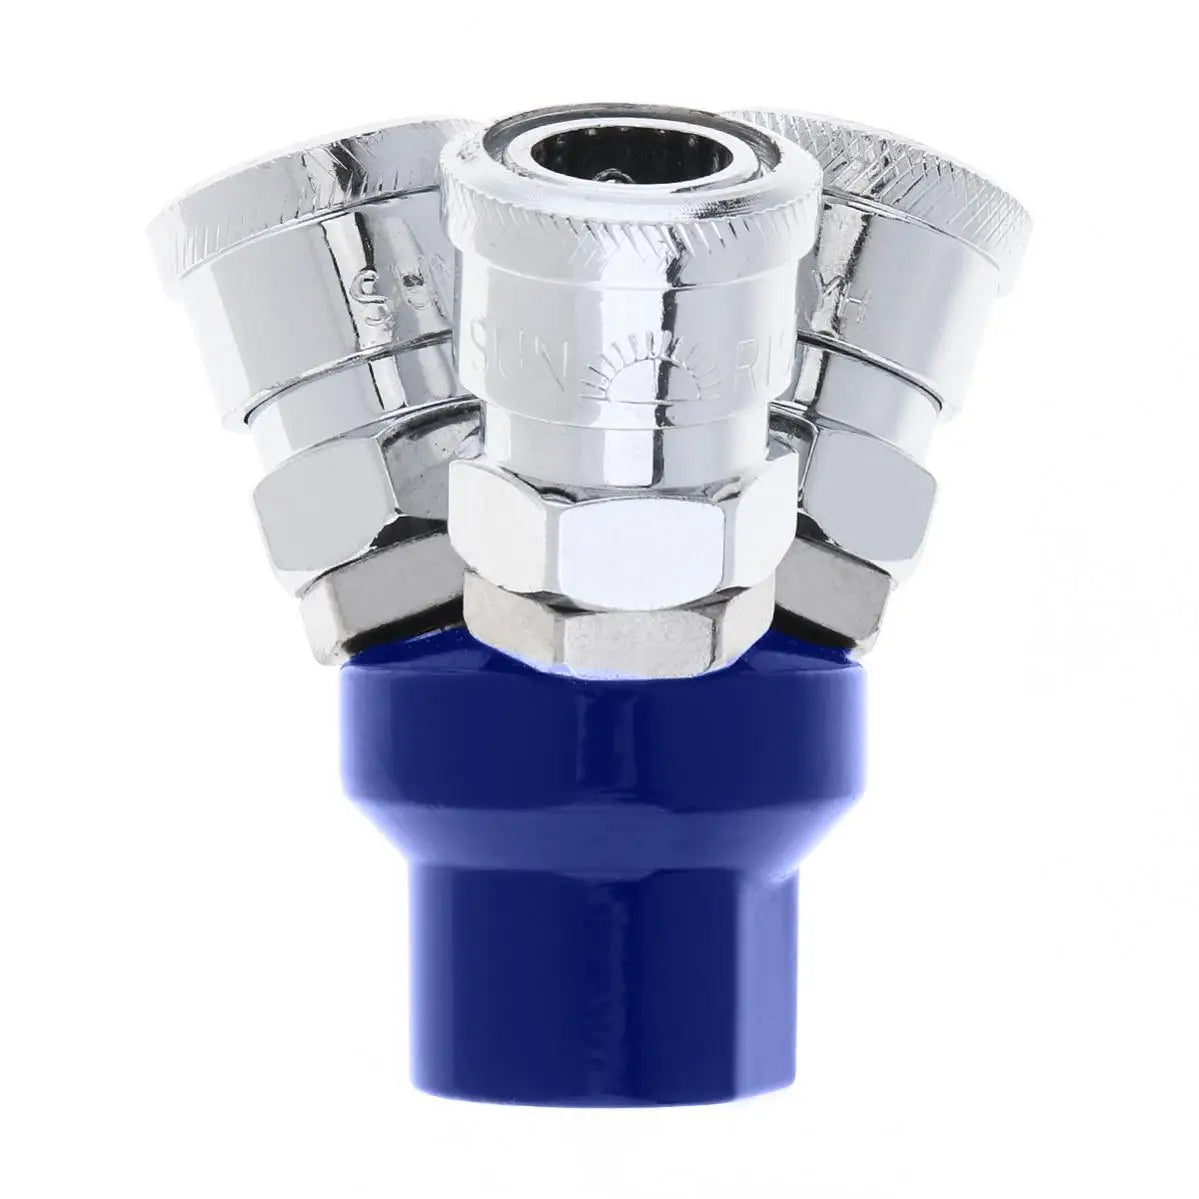 Pneumatic Fittings Three Way 1/4" Air Hose Quick Connector